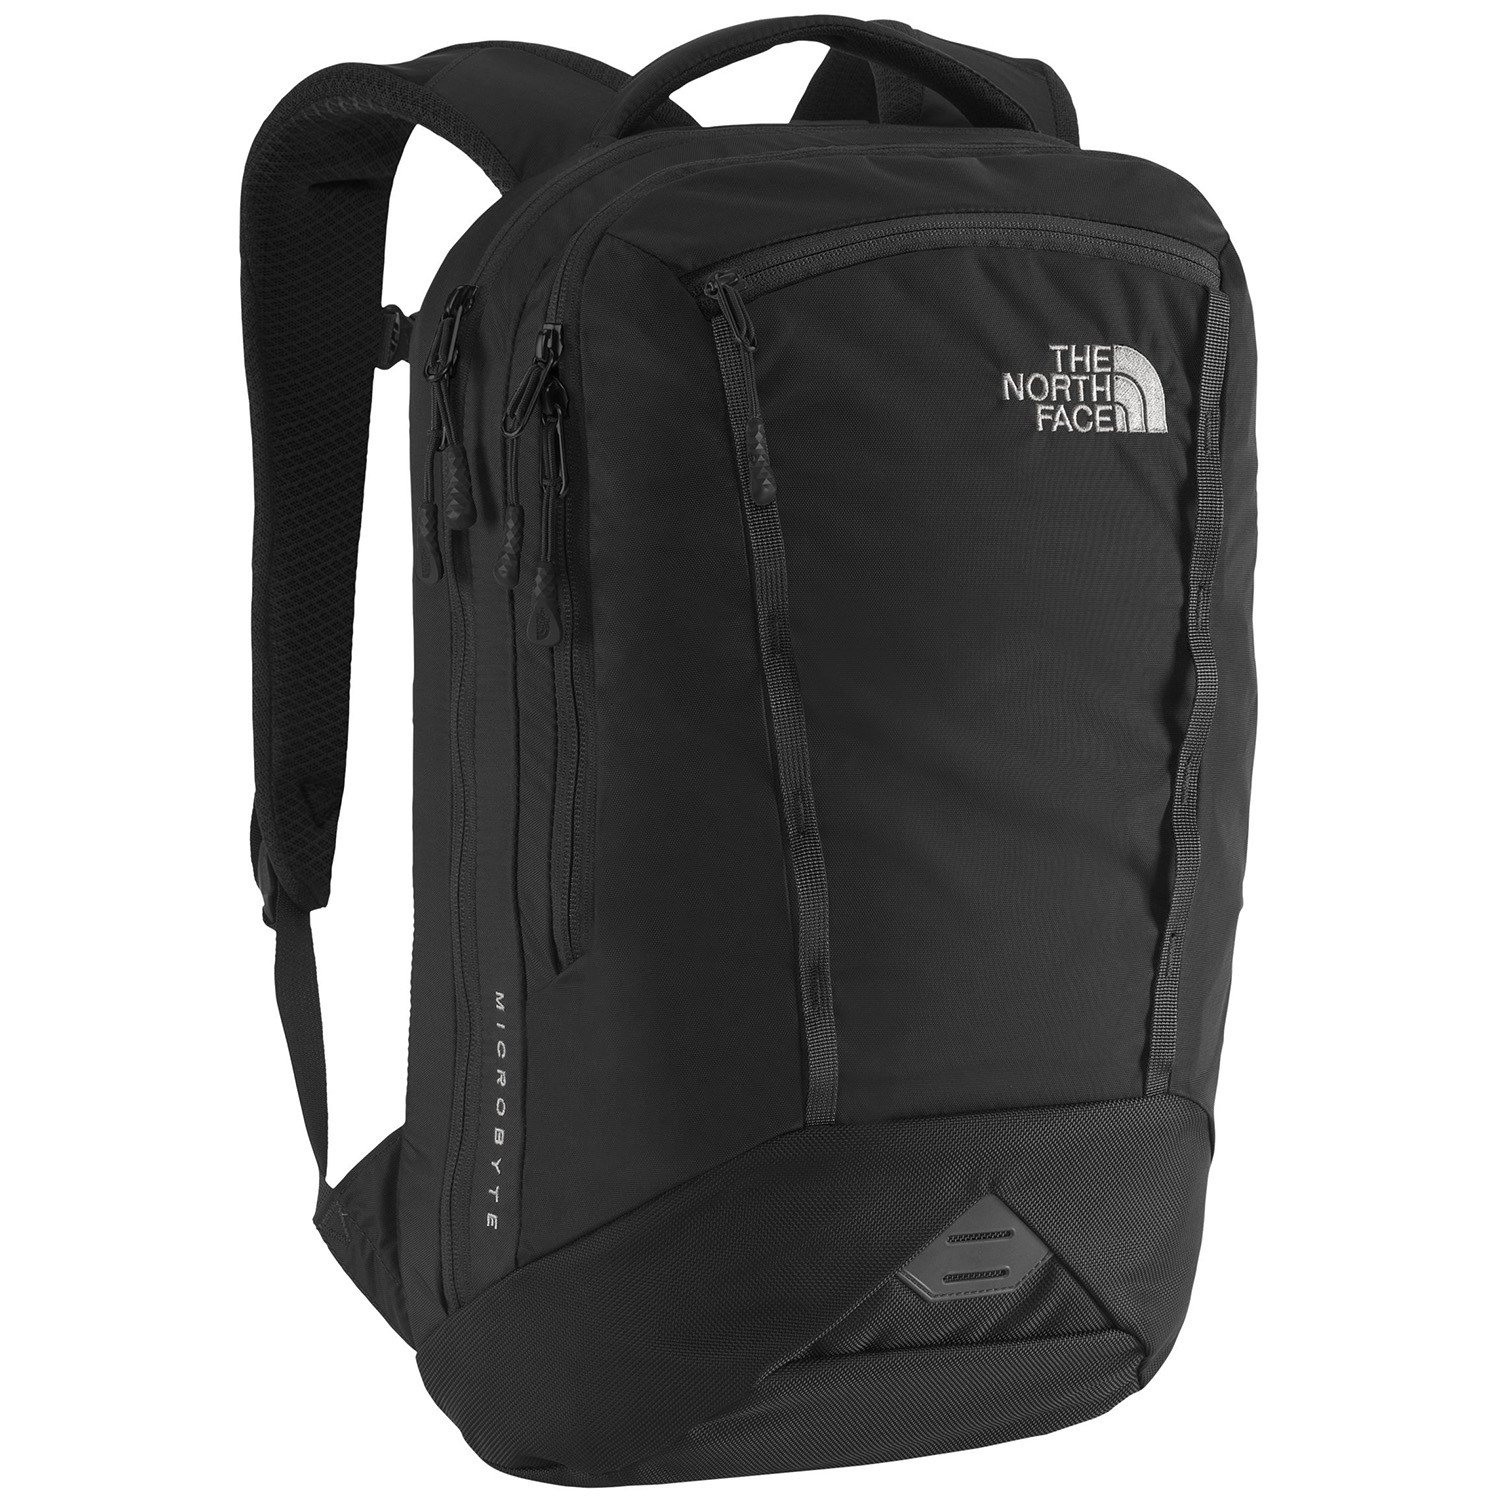 The North Face Microbyte Backpack | evo